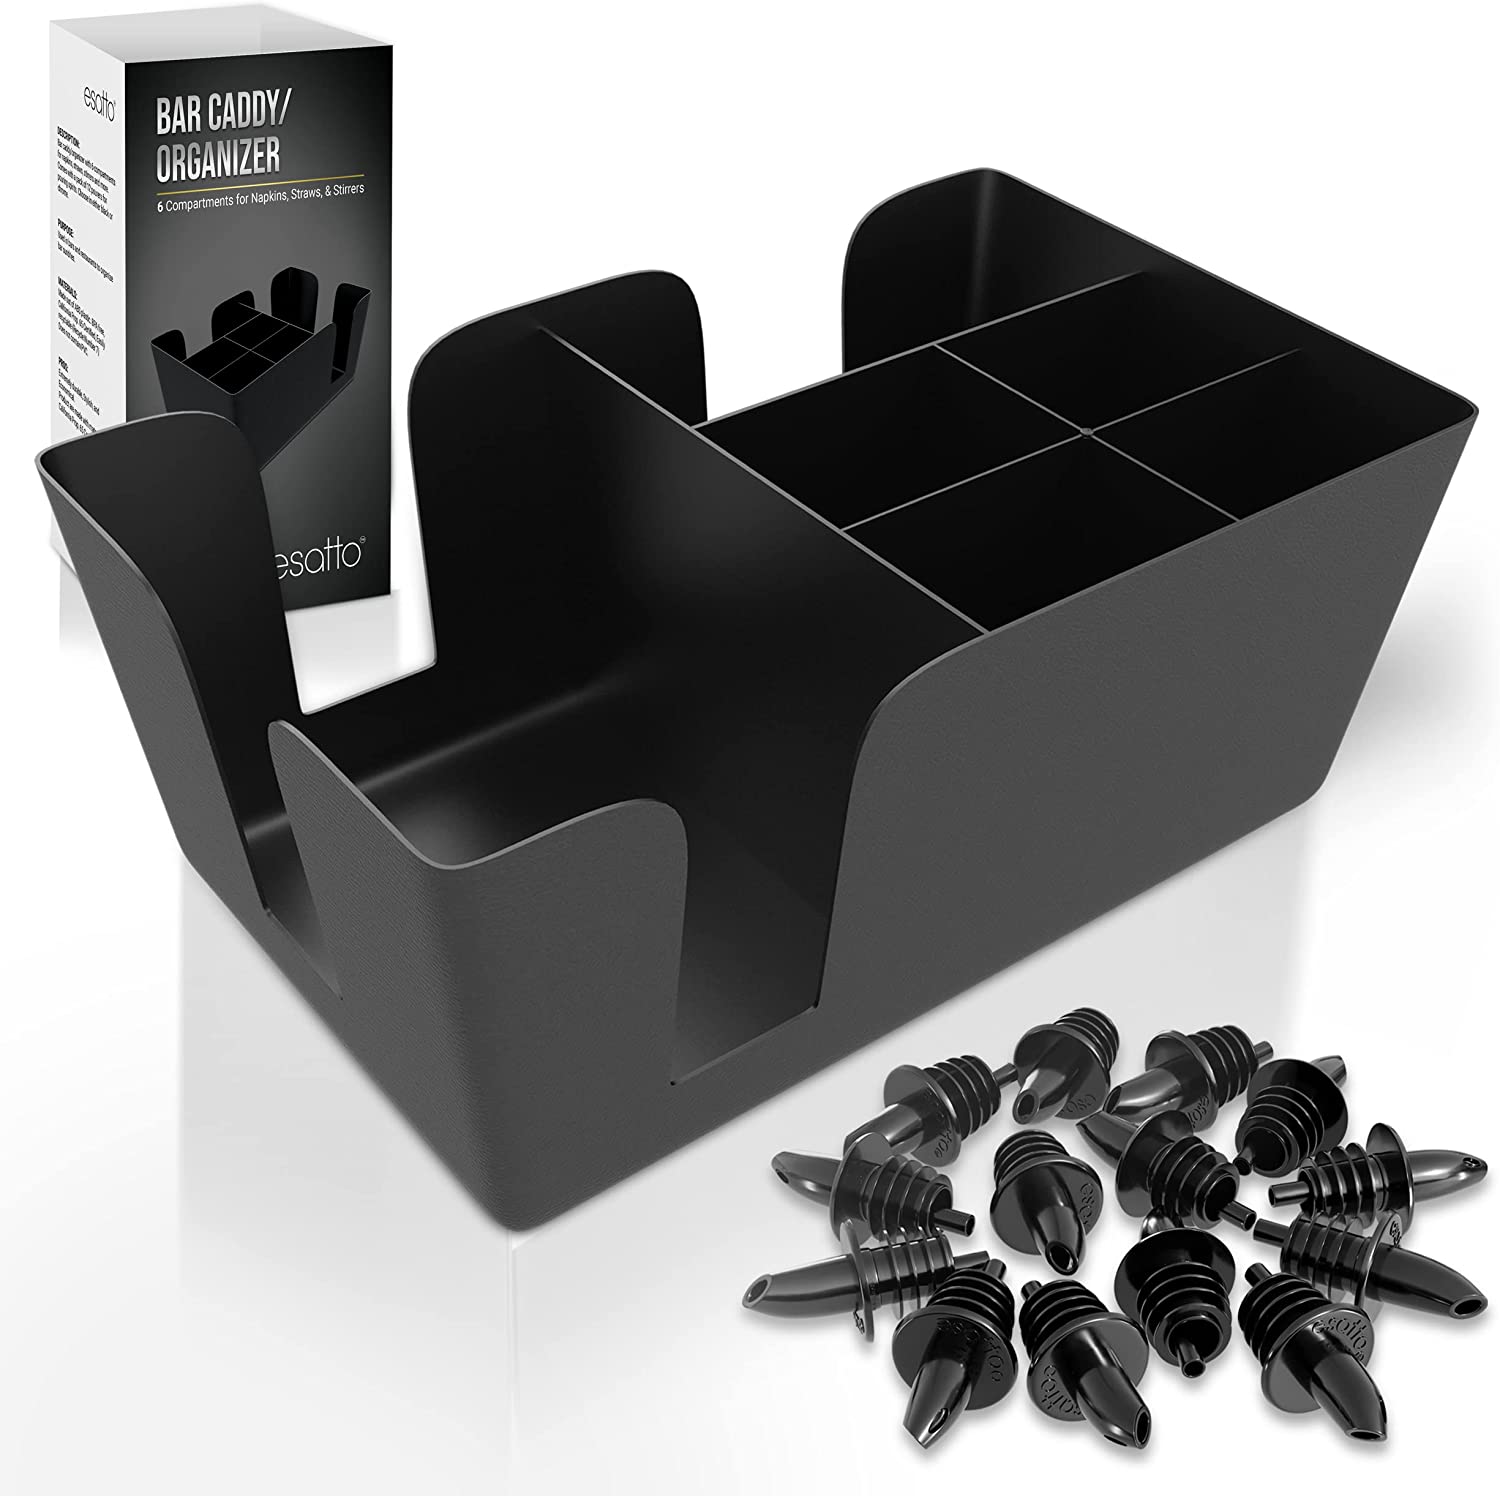 Featured image for “Esatto Bar Products Premium Rectangular Bar Caddy (Black), Organize Bar Items, With 12 Black Plastic Pourers Included”